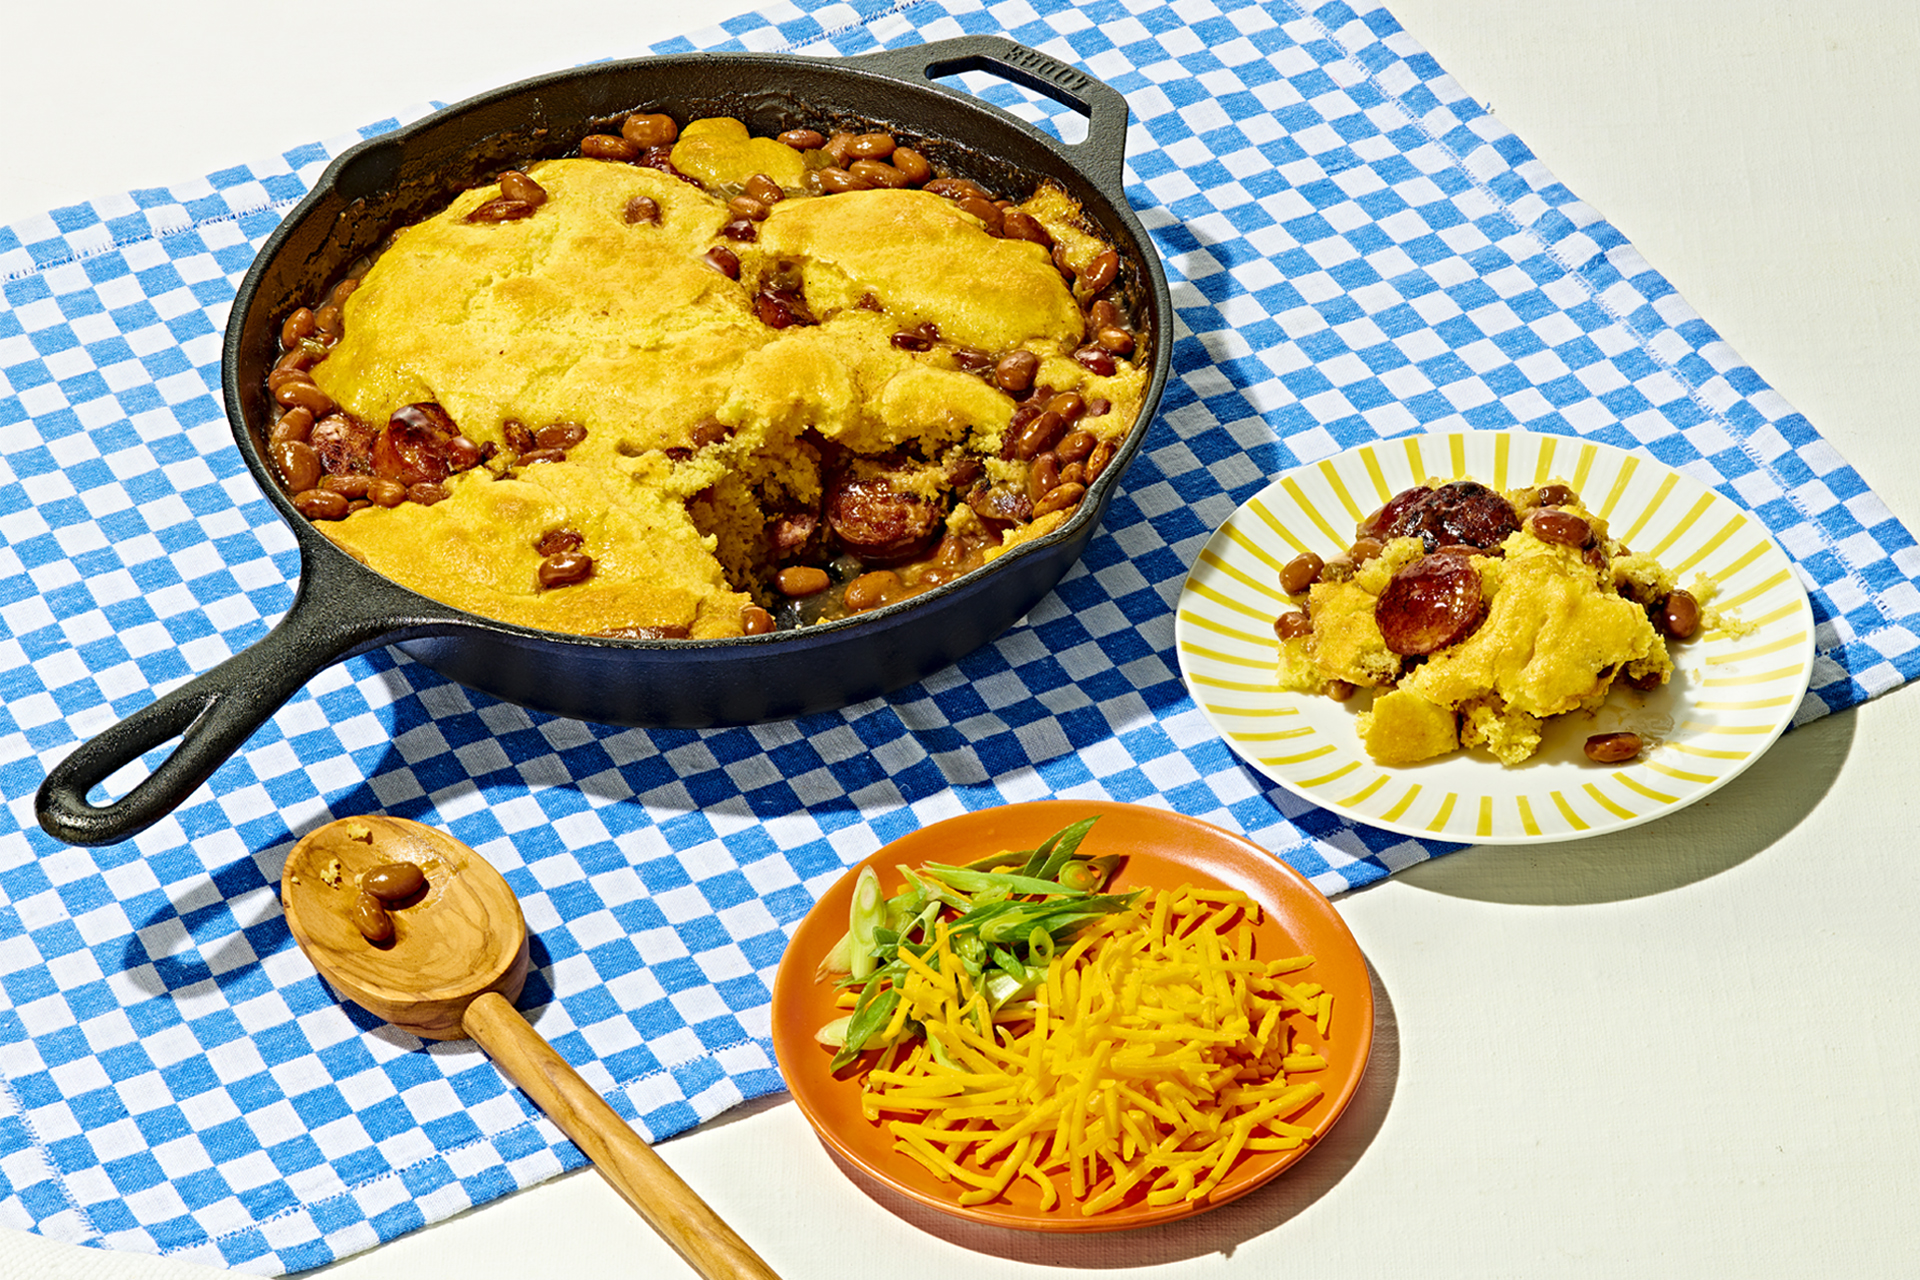 A cast iron skillet filled with a cornbread bake next to loaded plates on a blue gingham table cloth.